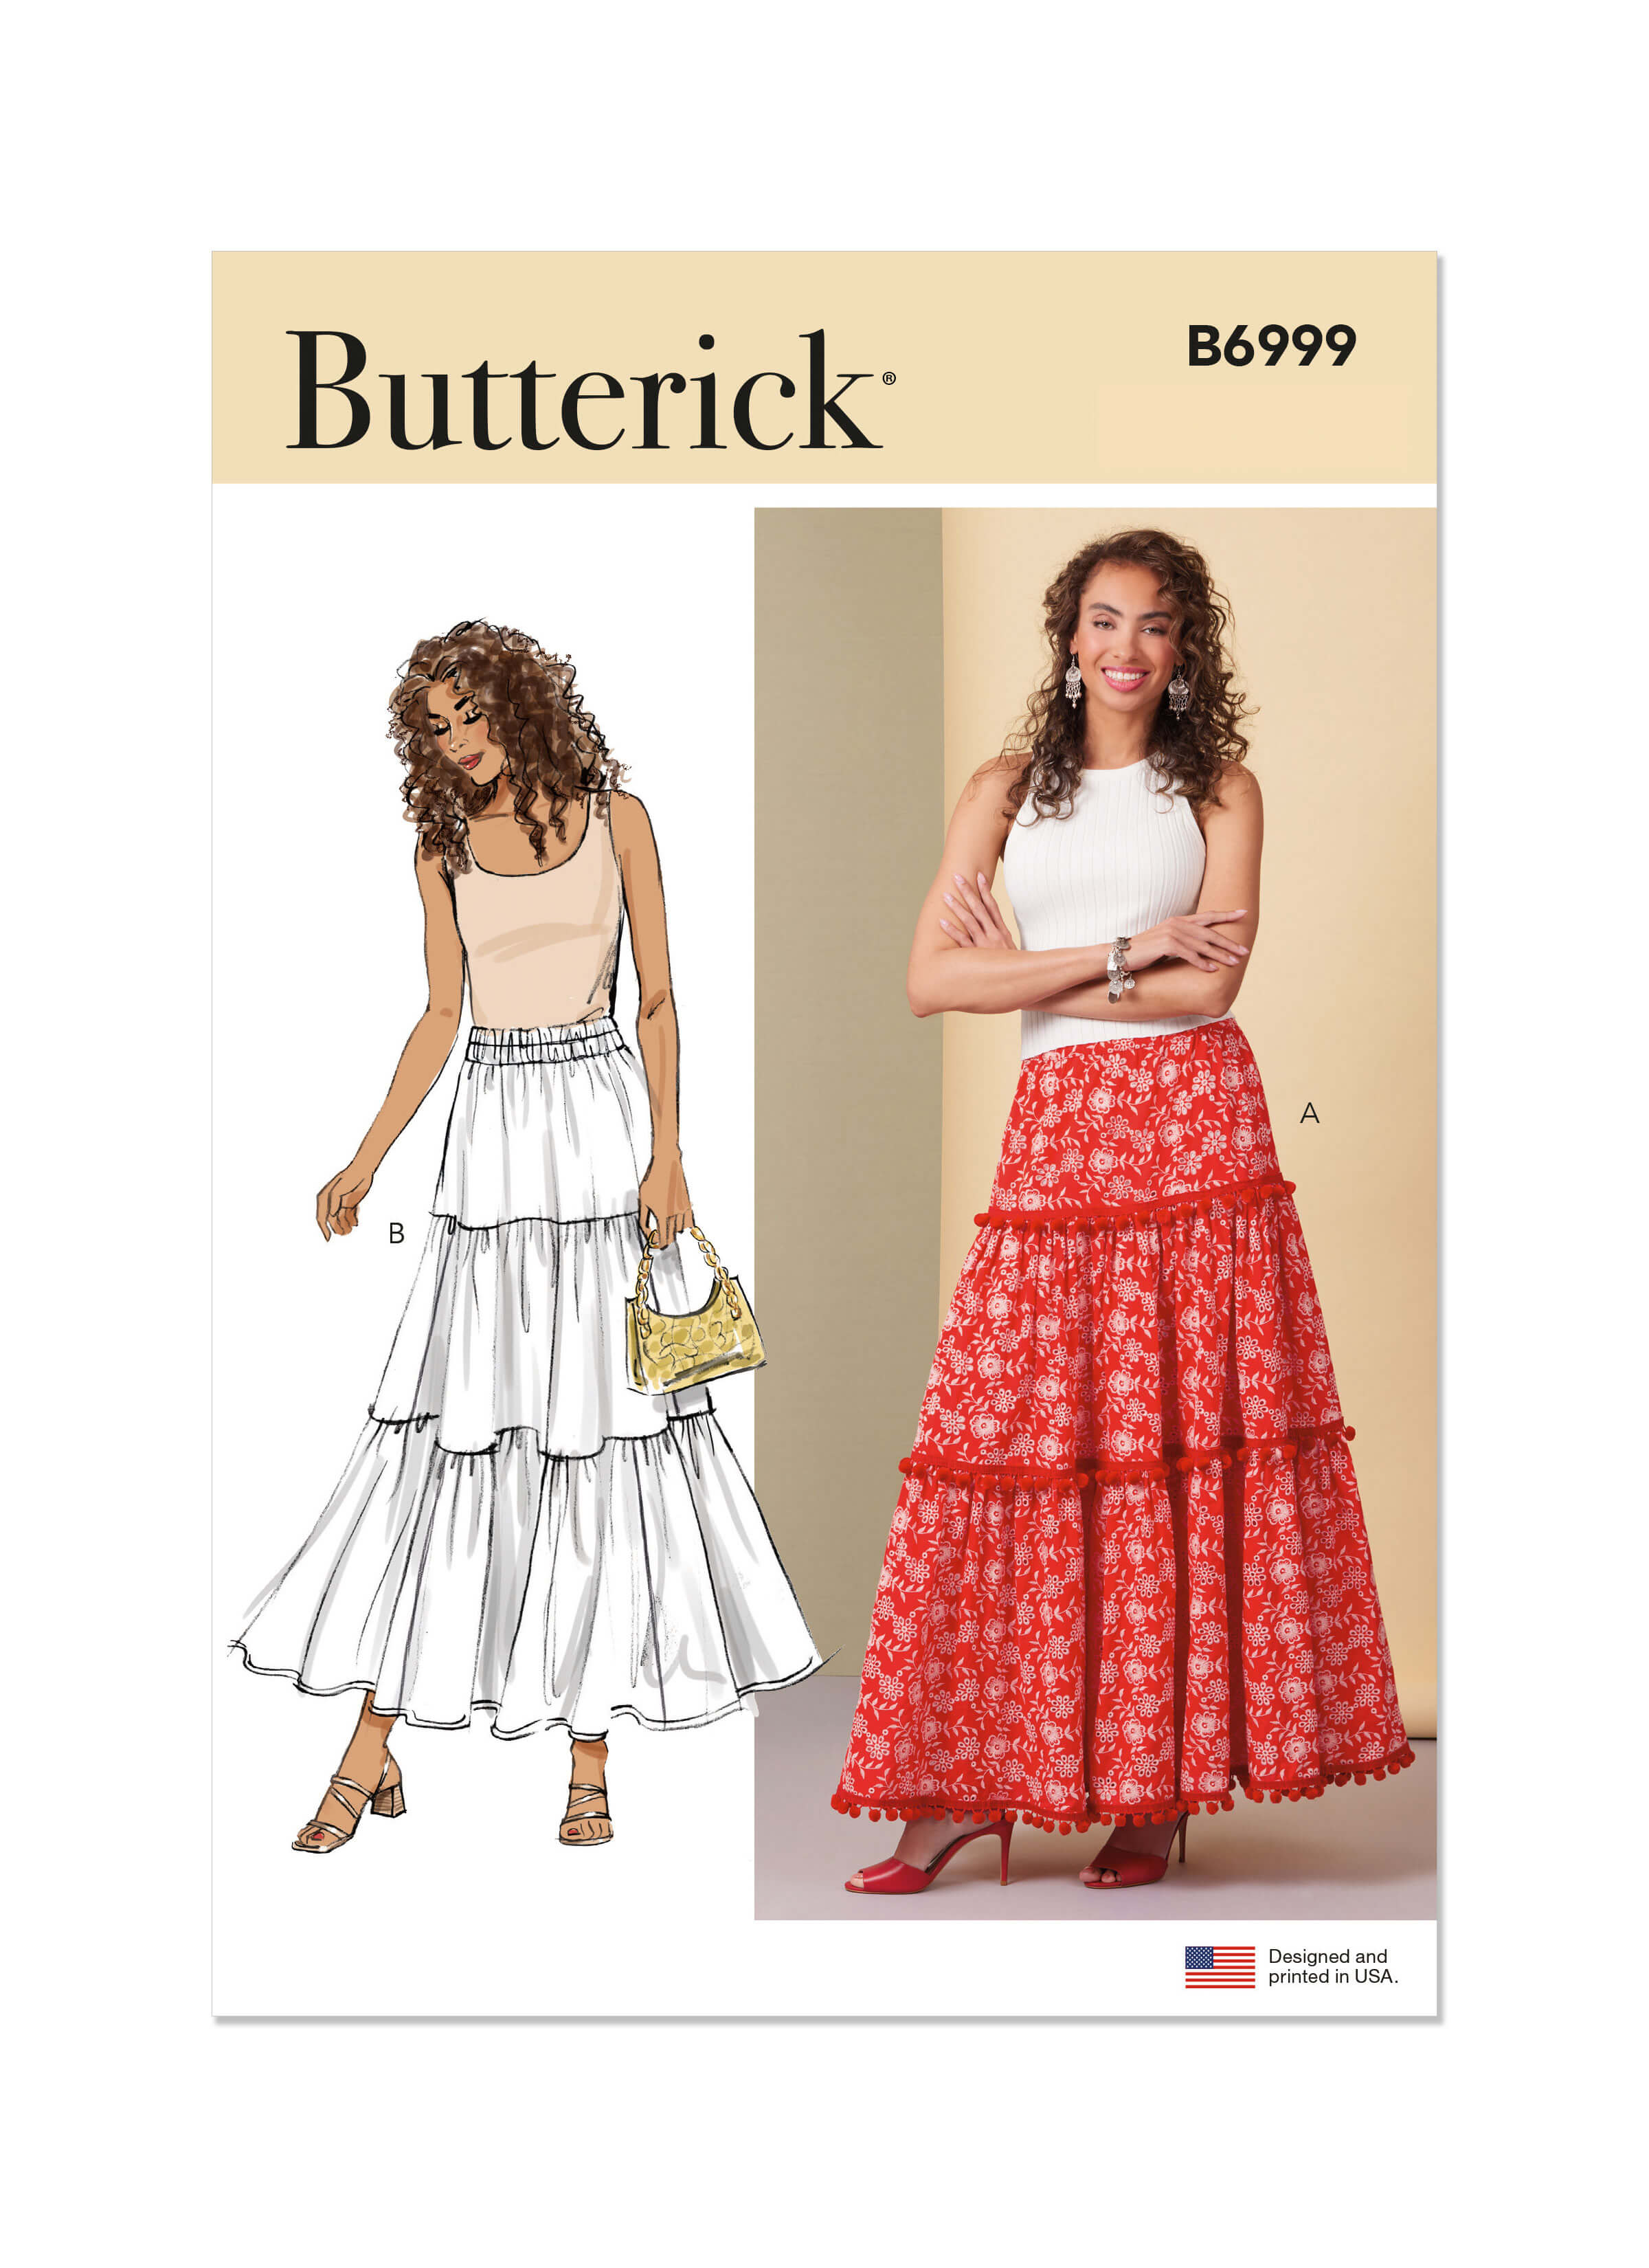 Butterick Sewing Pattern B6999 Misses' Skirts